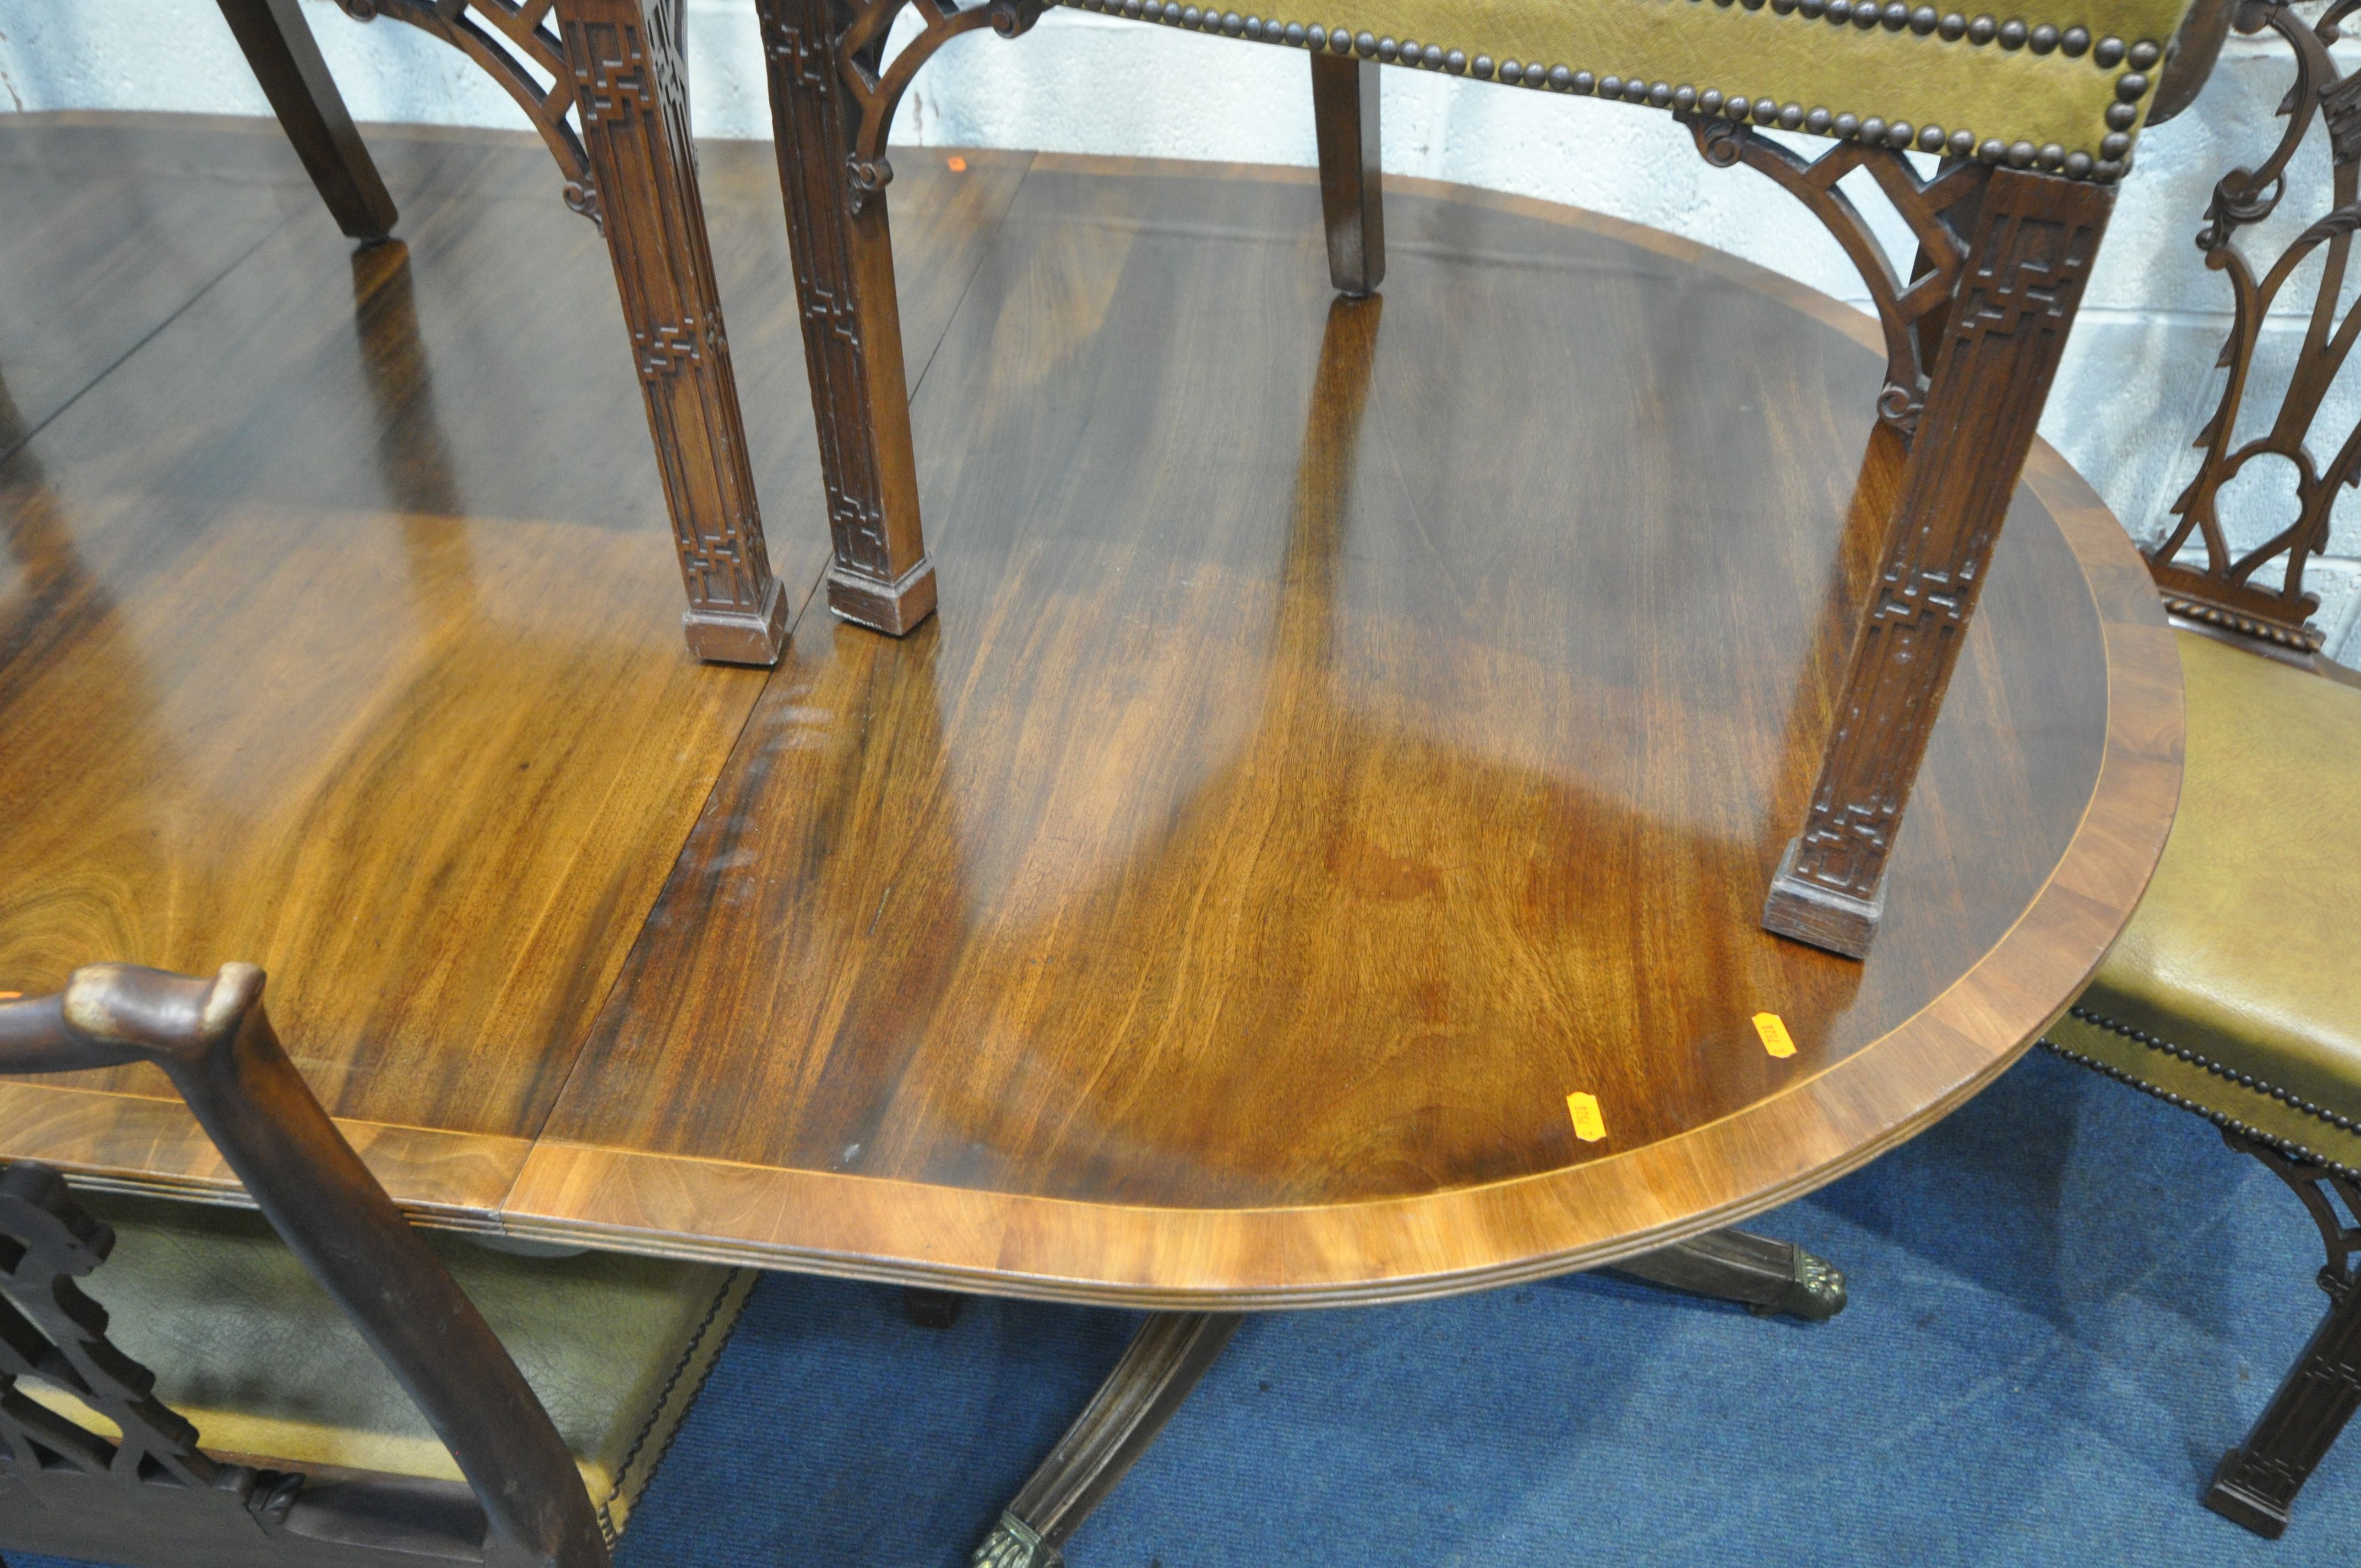 AN GEORGIAN STYLE MAHOGANY AND CROSSBANDED TWIN PEDESTAL DINING TABLE, with a single additional - Image 7 of 7